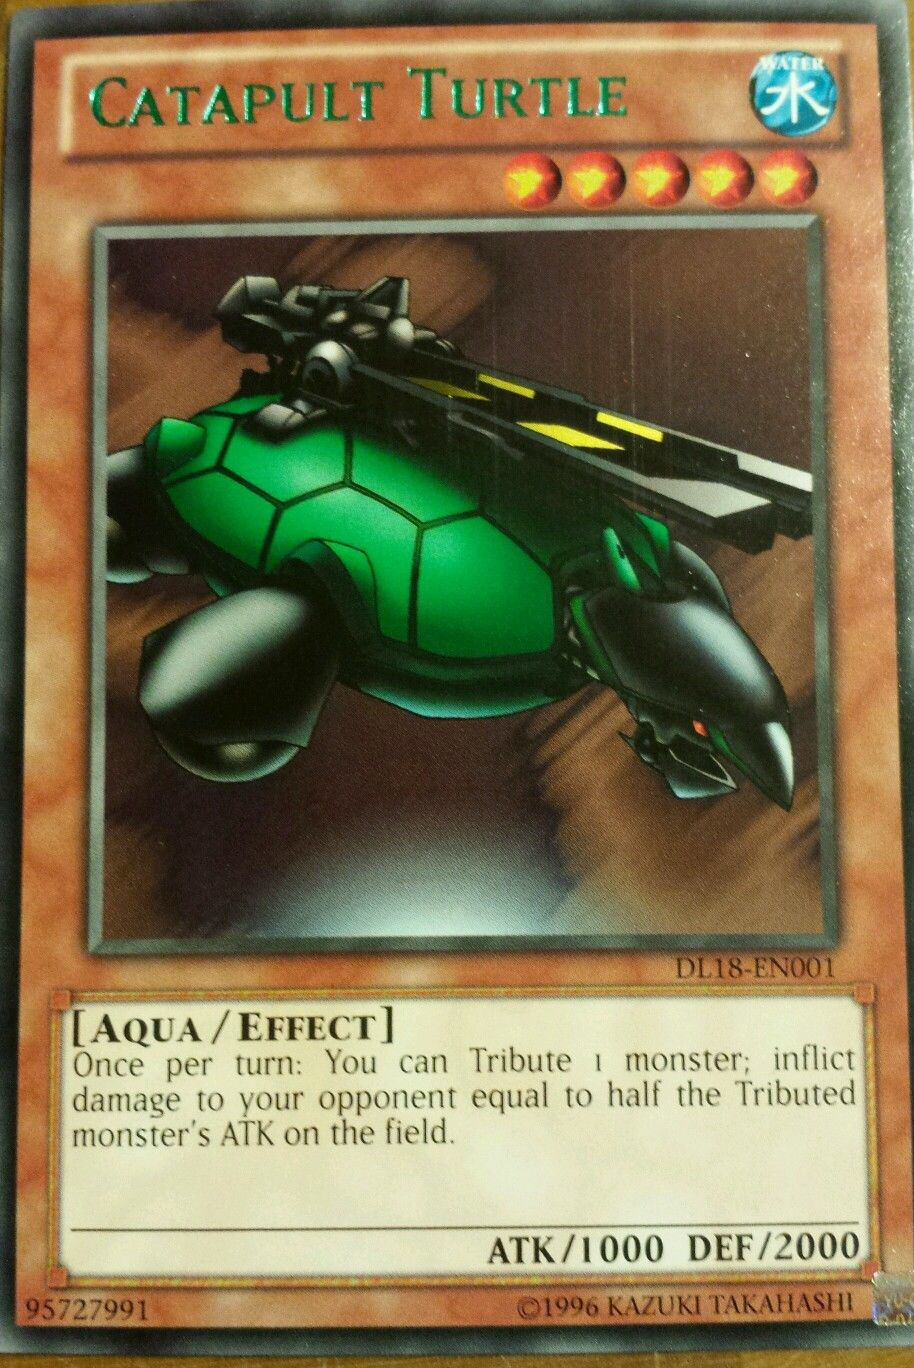 Catapult Turtle (Green) [DL18-EN001] Rare | The CG Realm